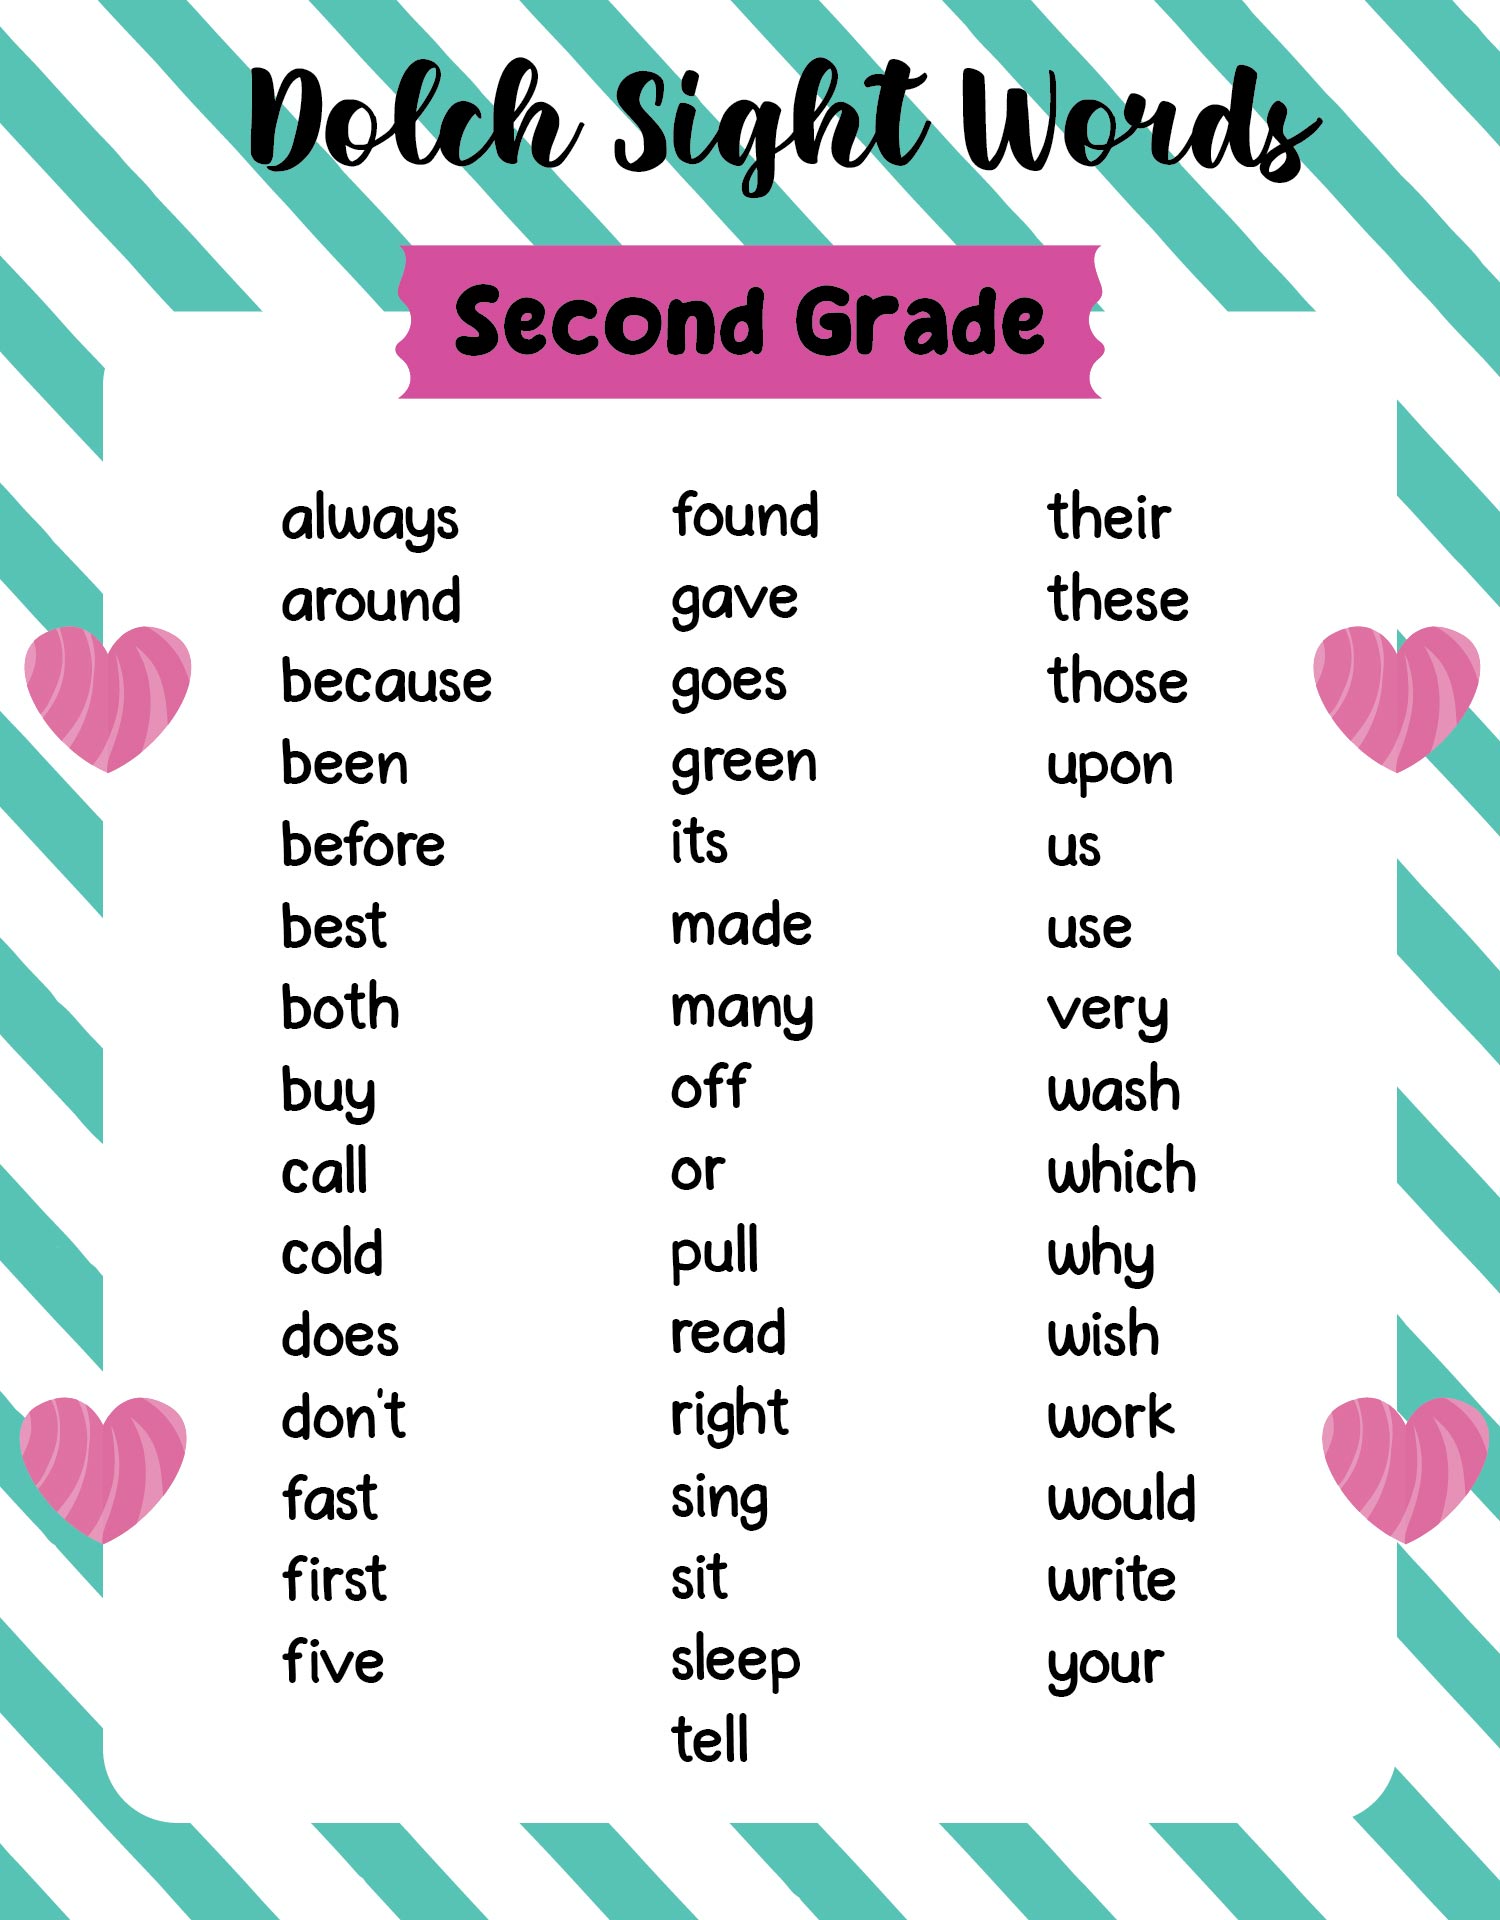 1st and 2nd grade dolch sight words